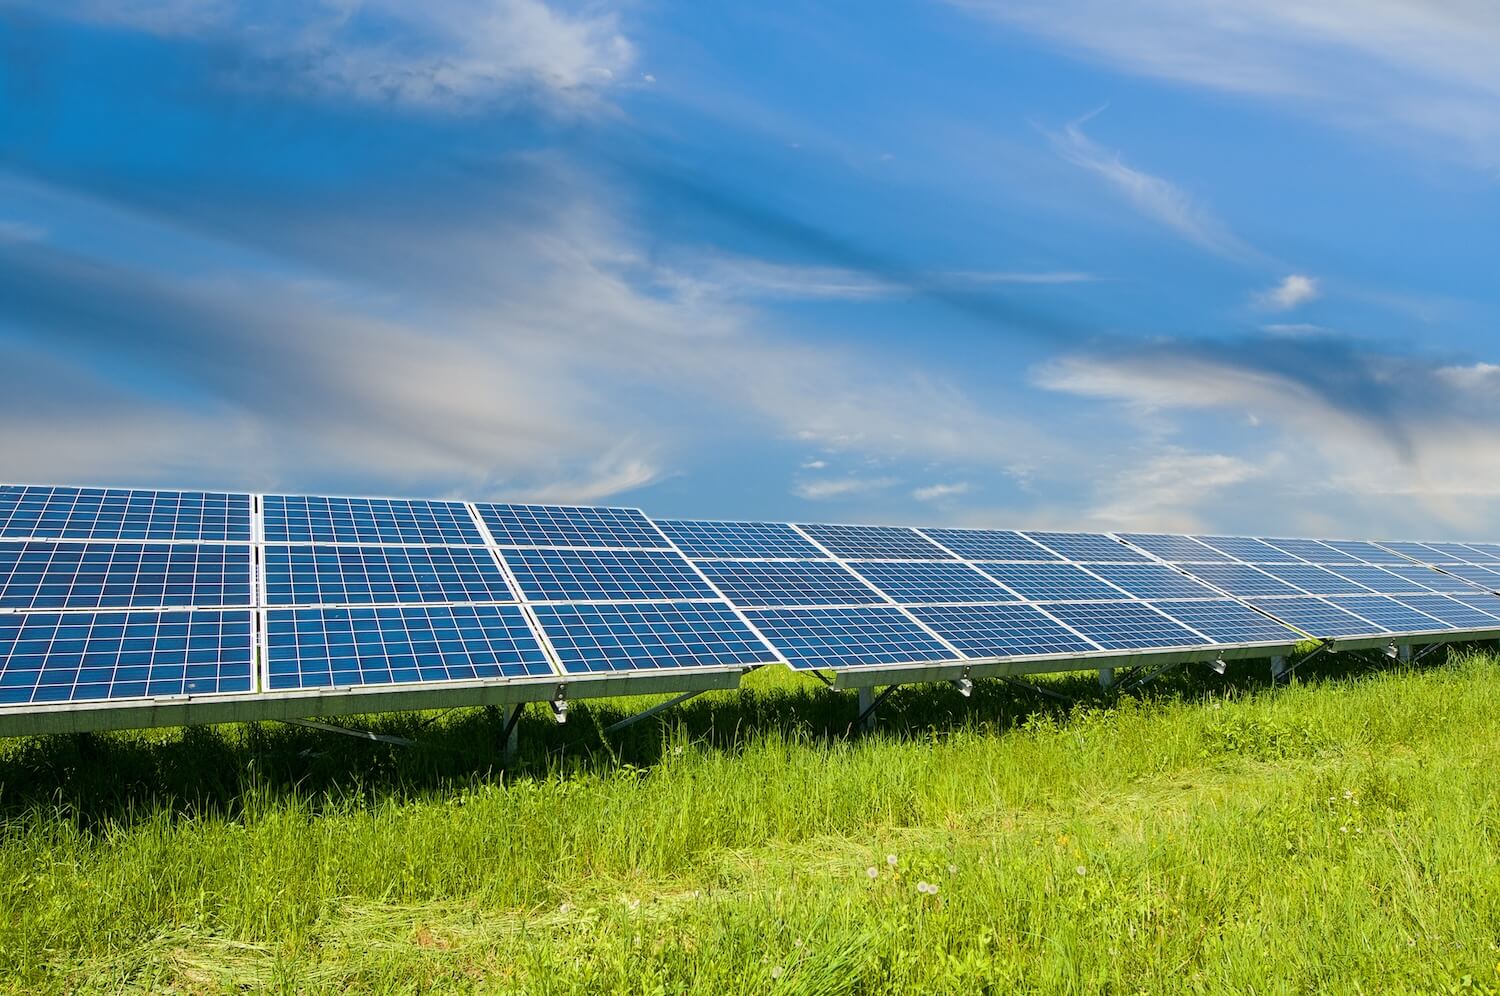 Are Utility-Grade Solar Farm Investors Eligible For Any Tax Benefits?